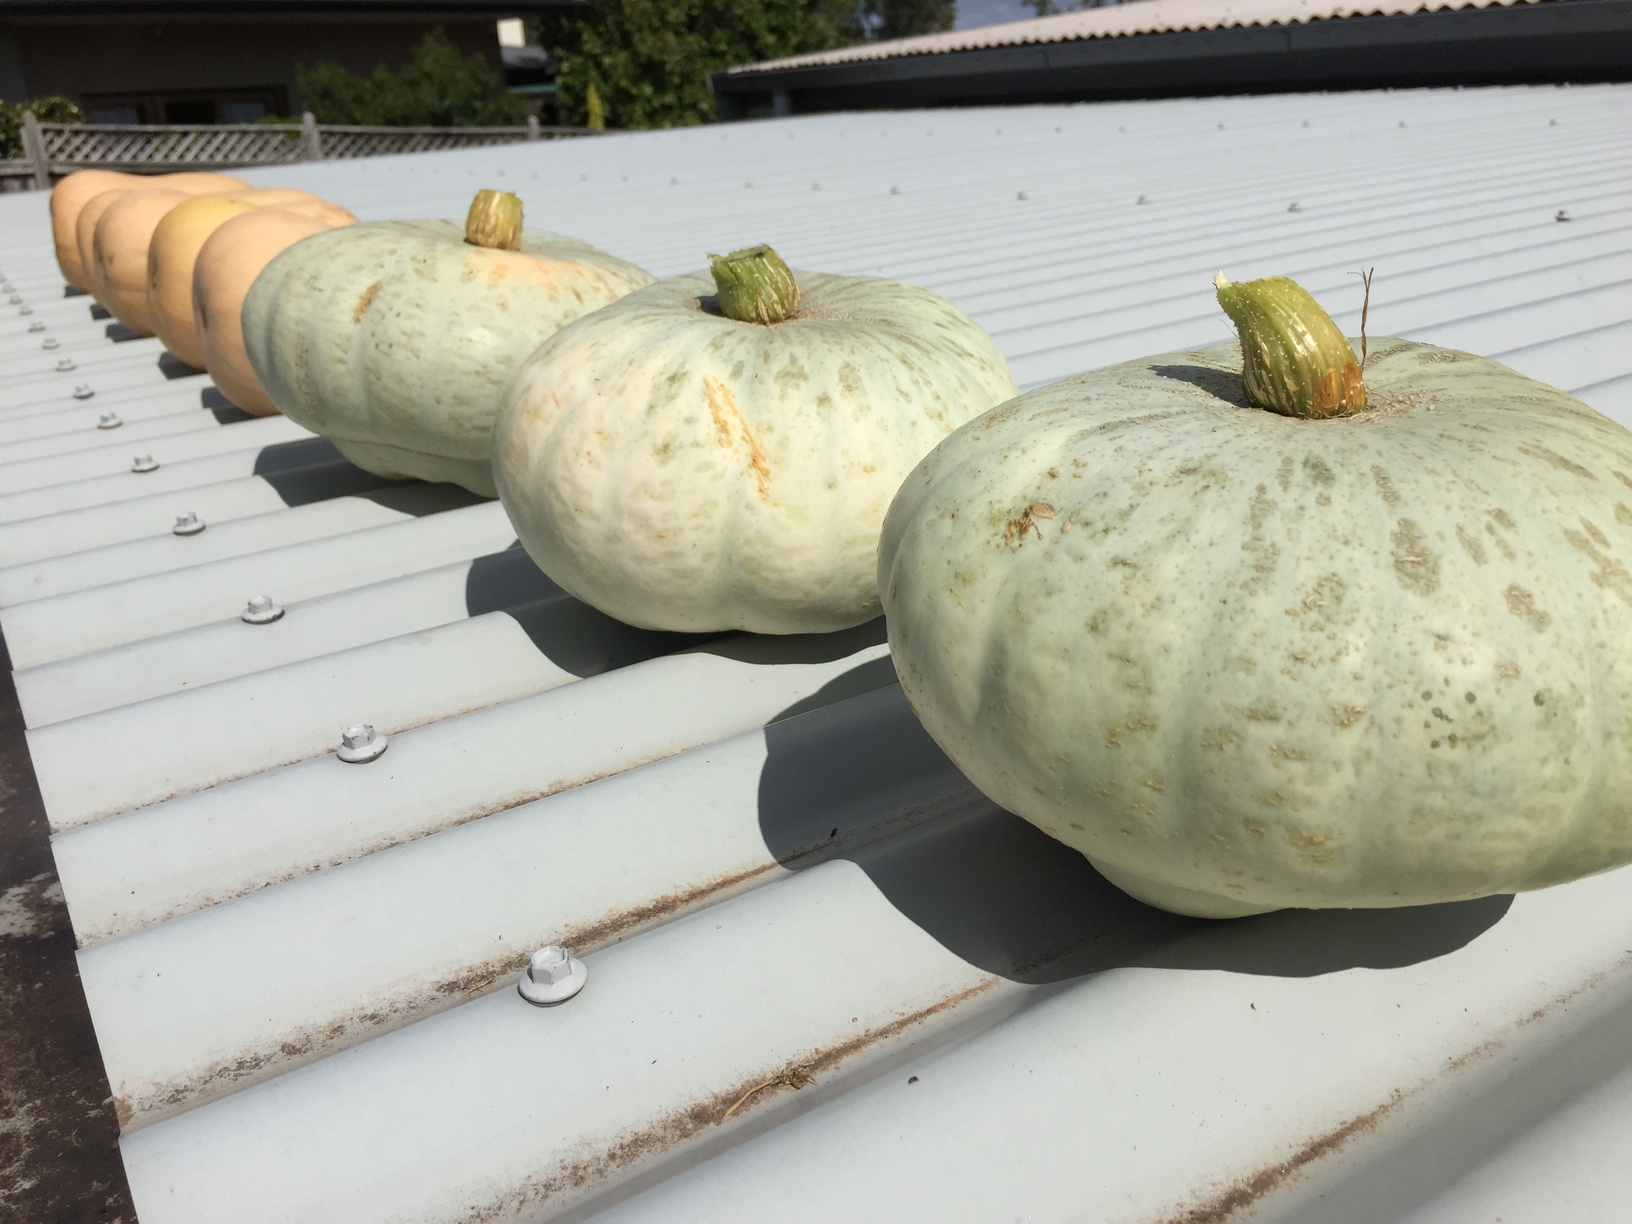 Whangaparaoa Crown and Butternut pumpkins on the tin roof